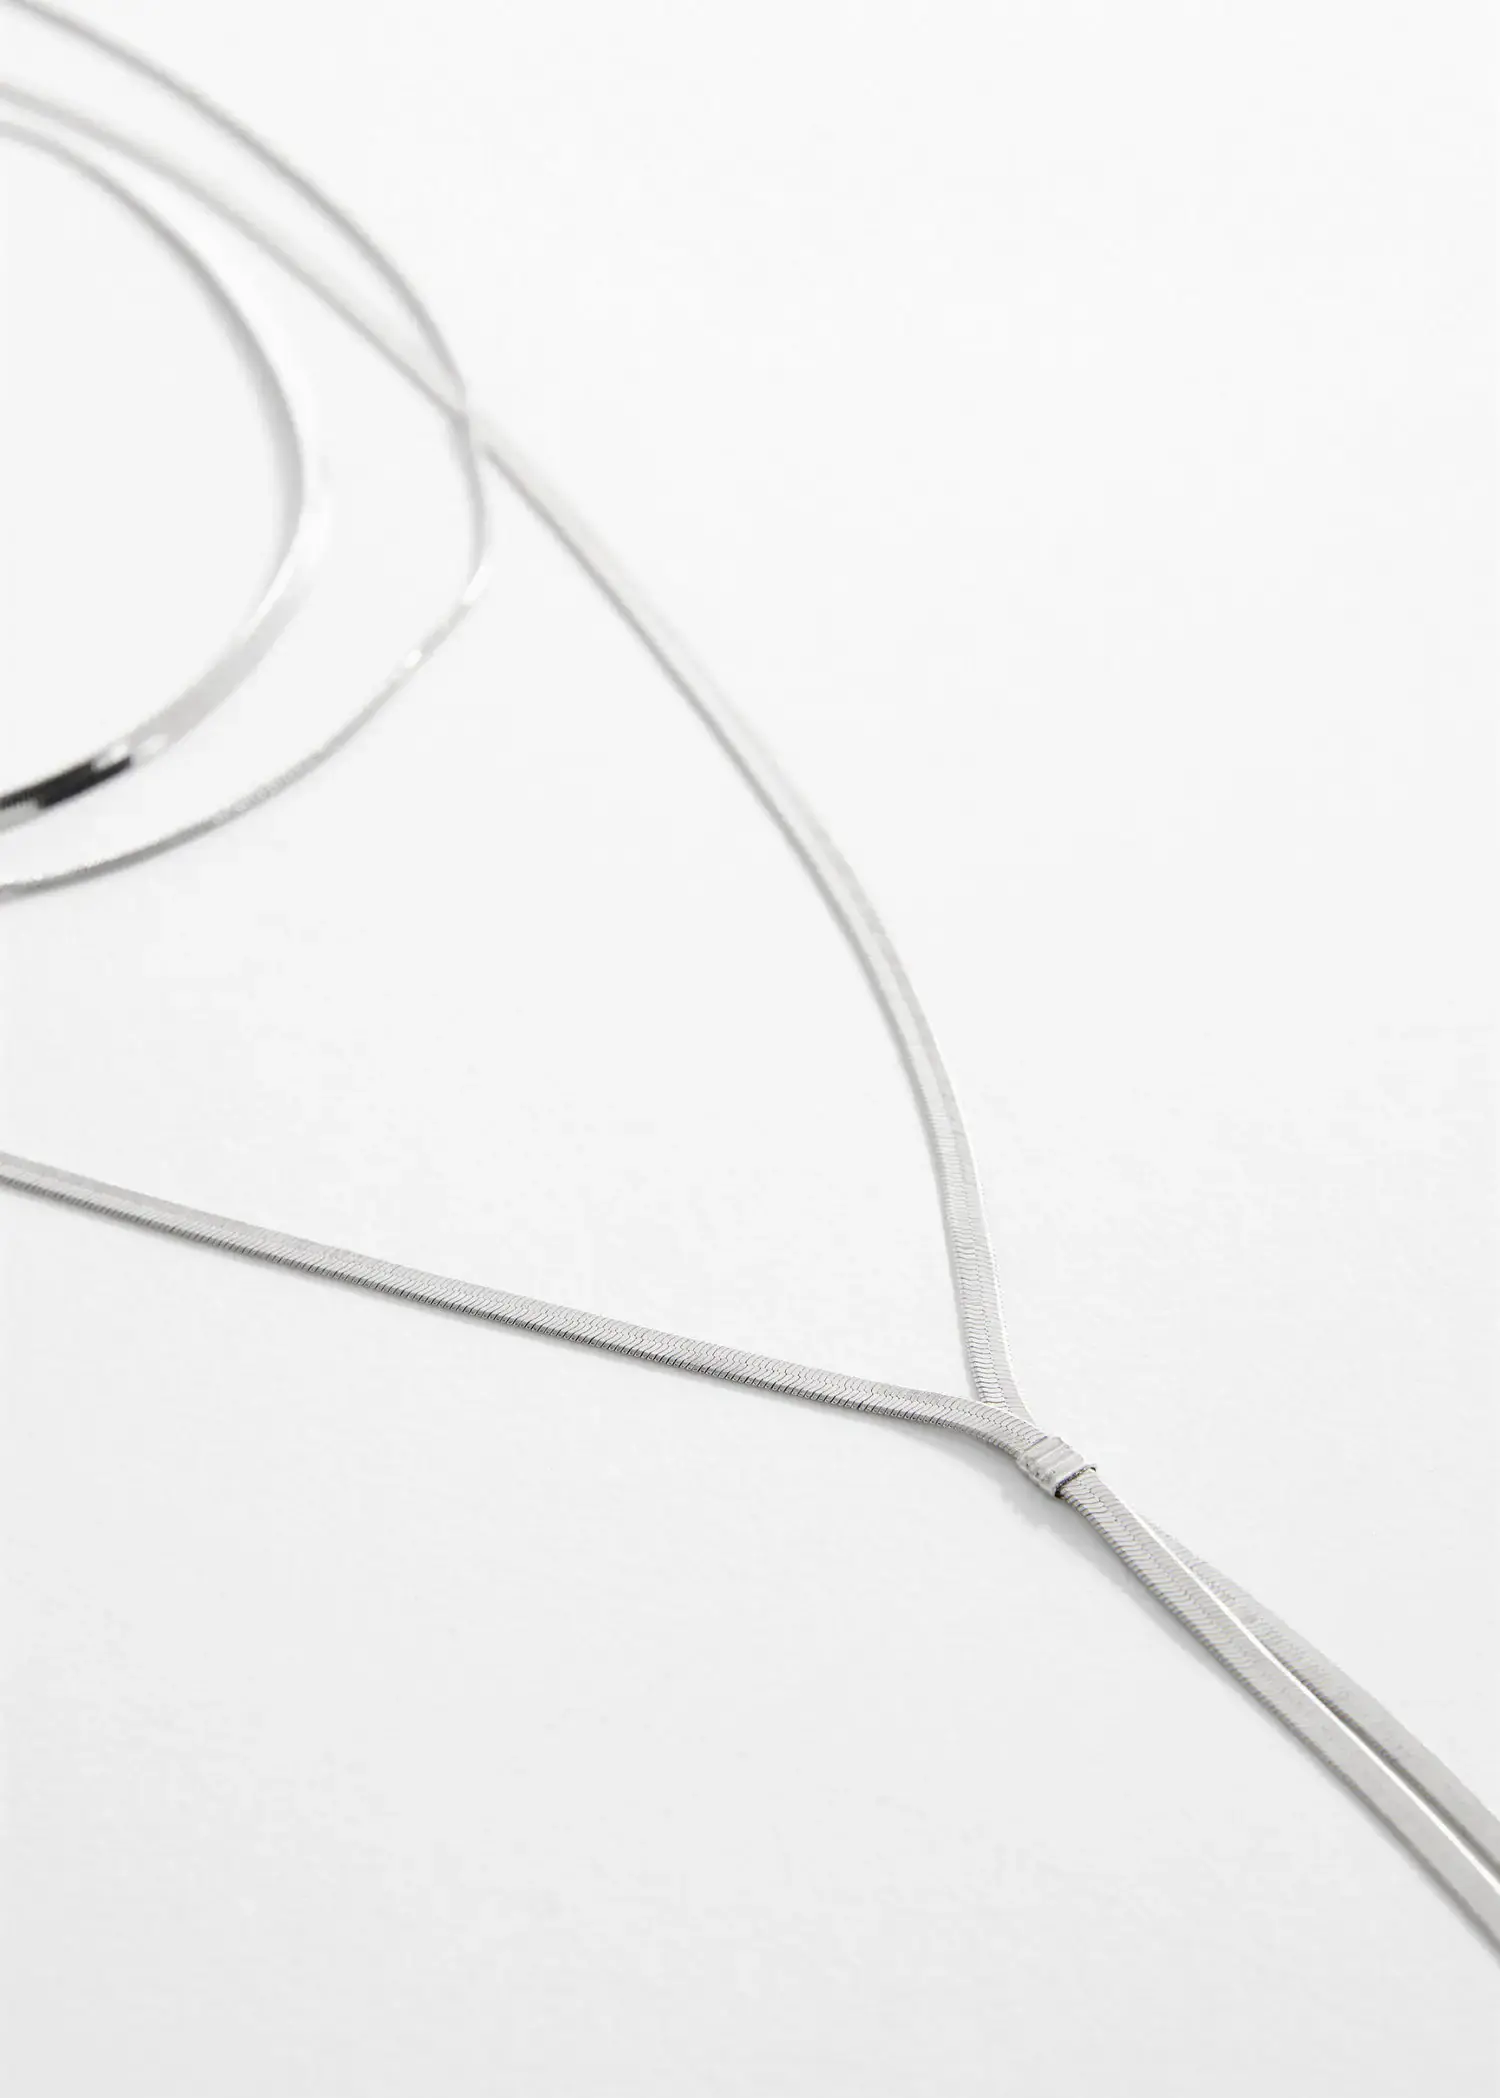 Mango Long triple necklace. a close-up of a long white necklace on a table. 